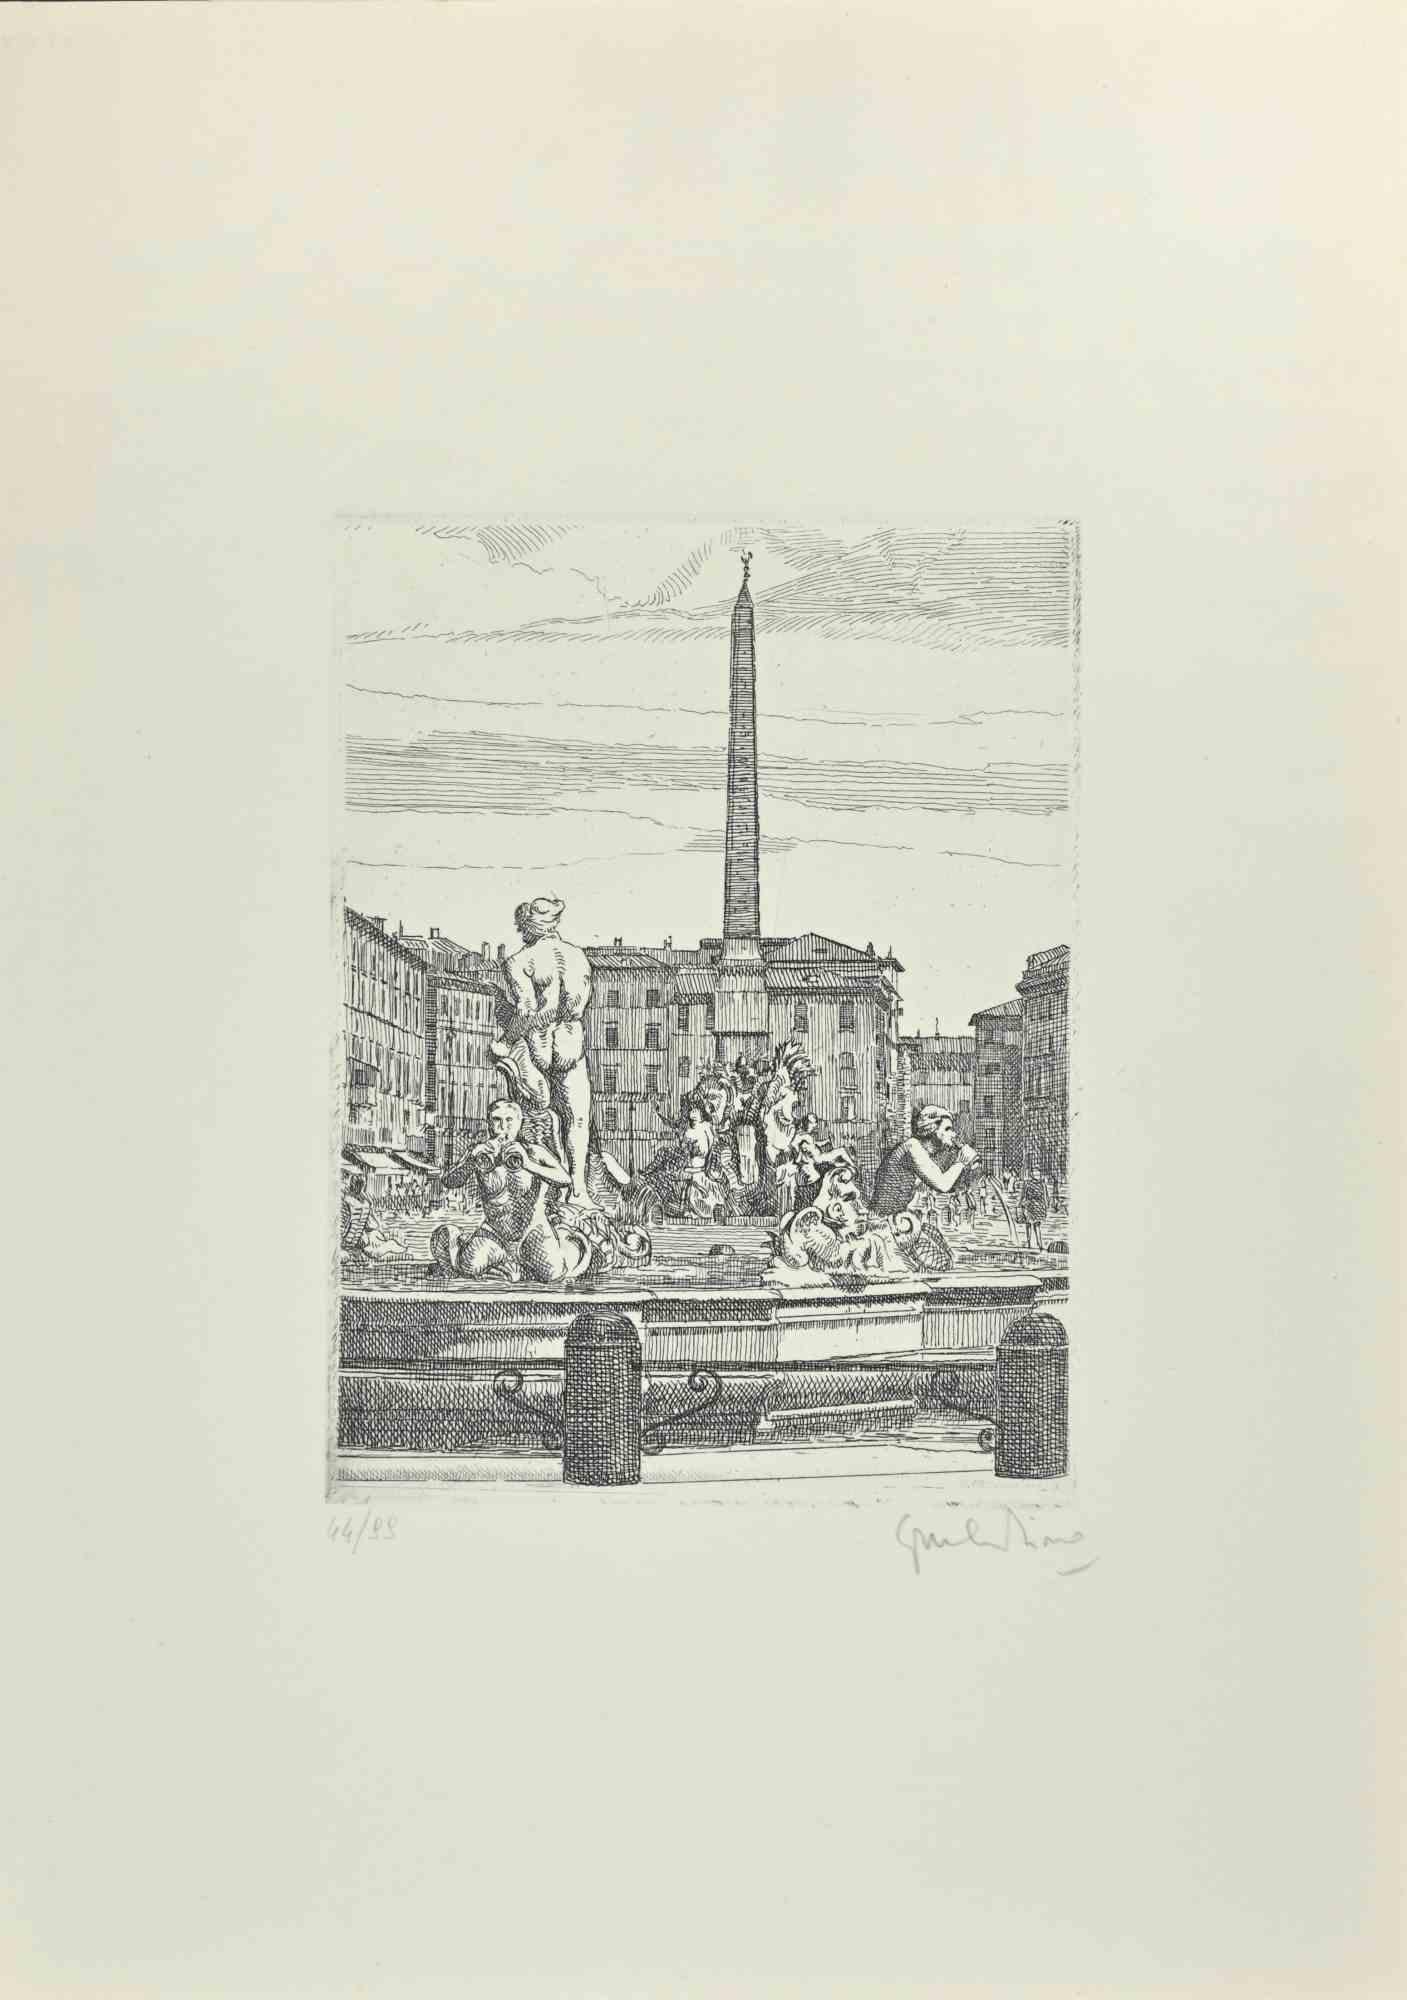 Navona Square - Fountain of 4 Rivers is an artwork realized by Giuseppe Malandrino.

Print in etching technique.

Hand-signed by the artist in pencil on the lower right corner.

Numbered edition of 99 copies.

Good condition. 

This artwork